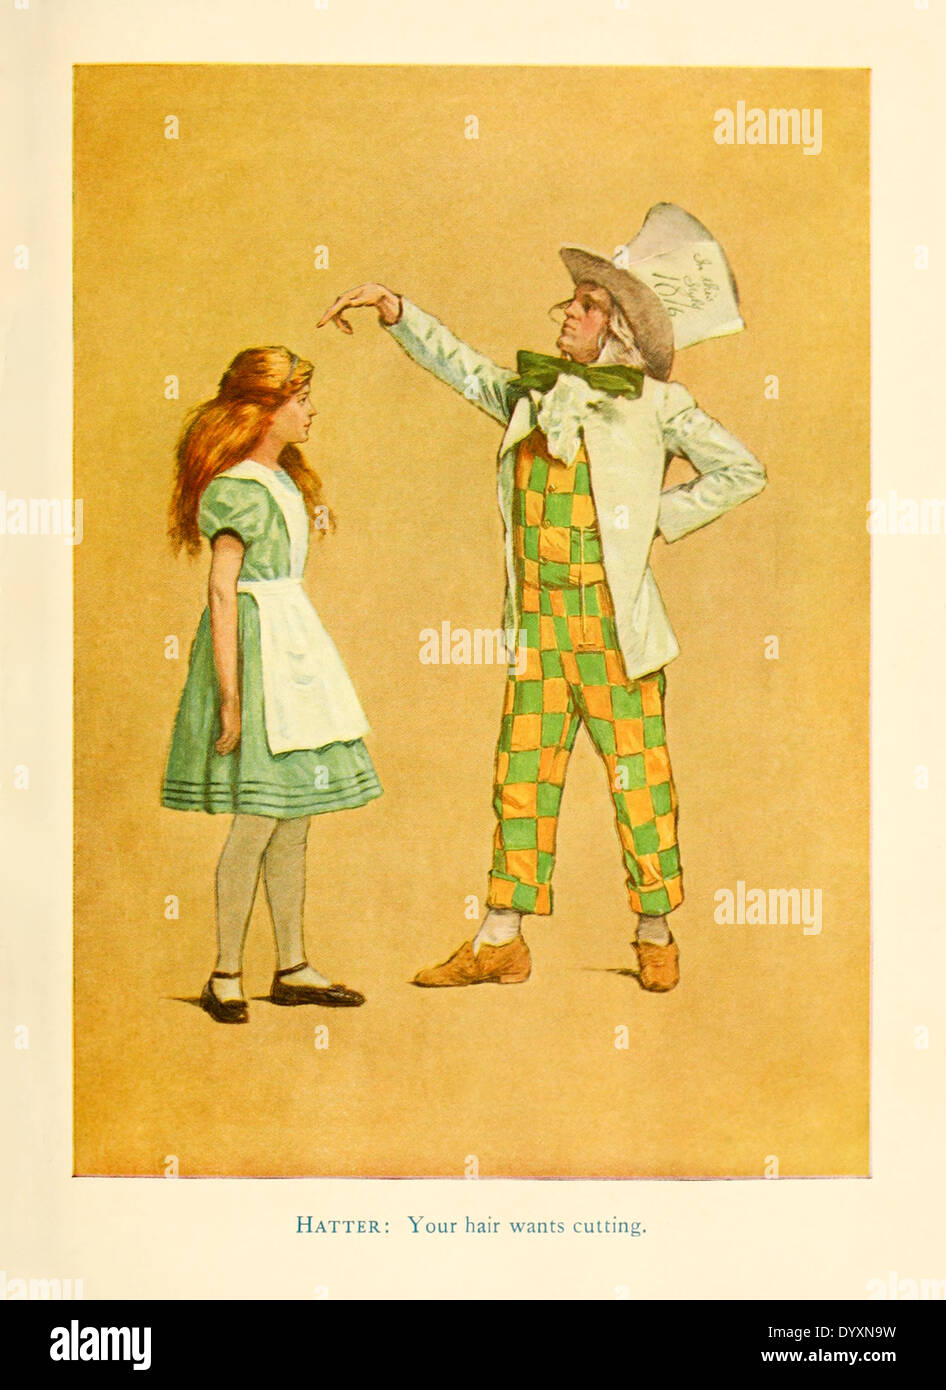 Alice and the Hatter, from for the 1915 stage adaptation of 'Alice in Wonderland' by Lewis Carroll, illustration by James Allen St. John (1872-1957). See description for more information. Stock Photo